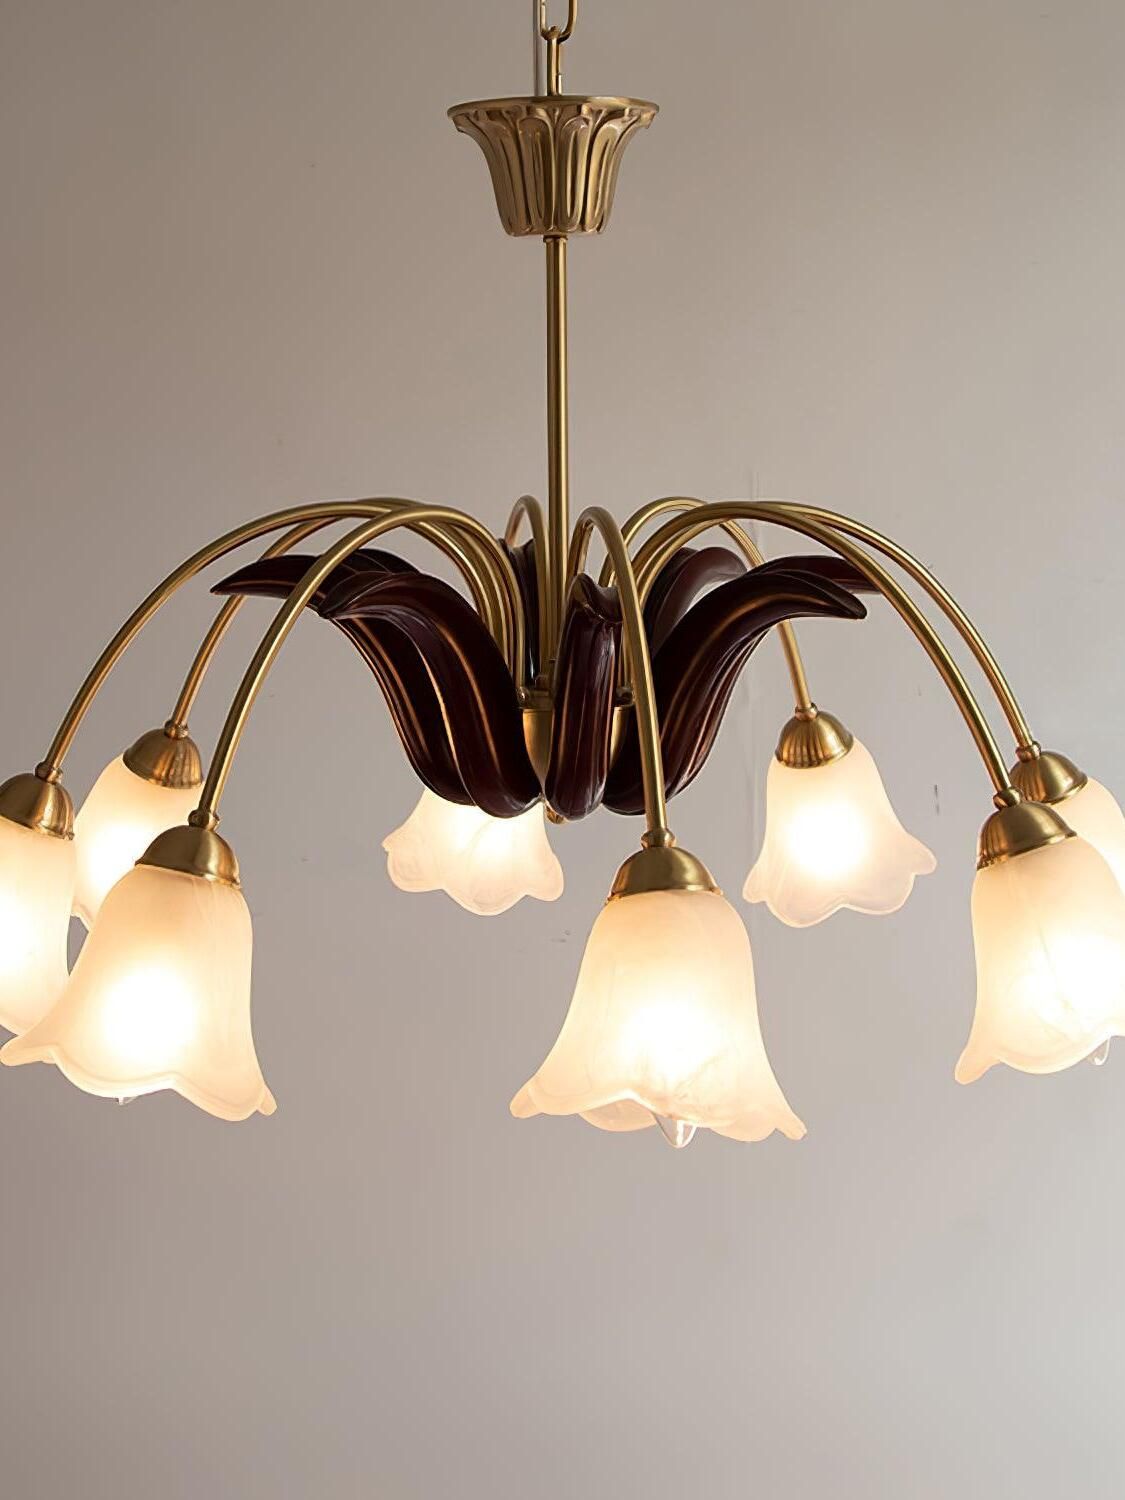 Choice Of Chandeliers Best Chandelier Options for Elegant Lighting in Any Room